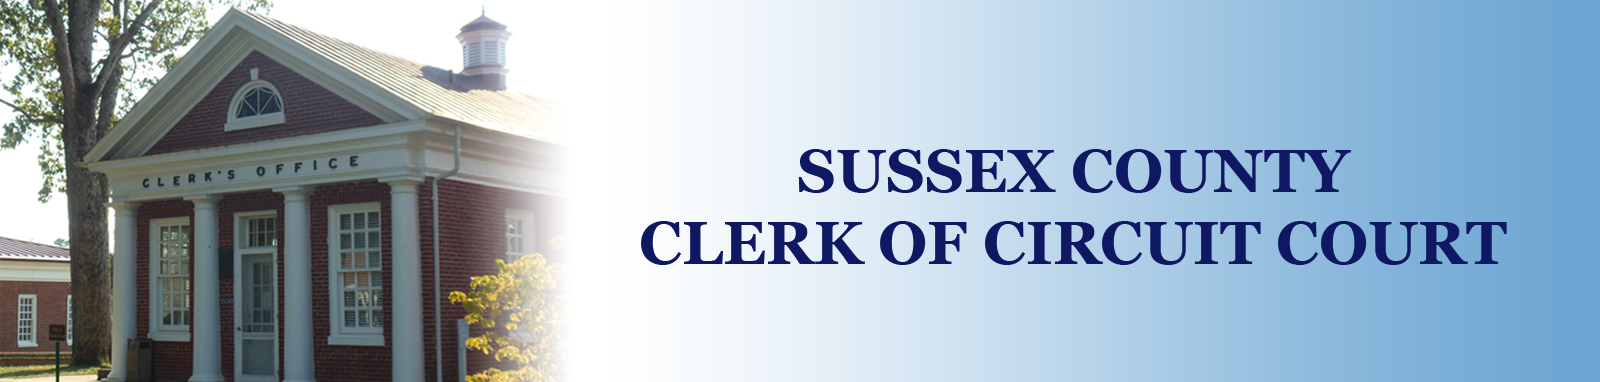 Charlotte County Clerk Of The Circuit Court Charlotte County Clerk of